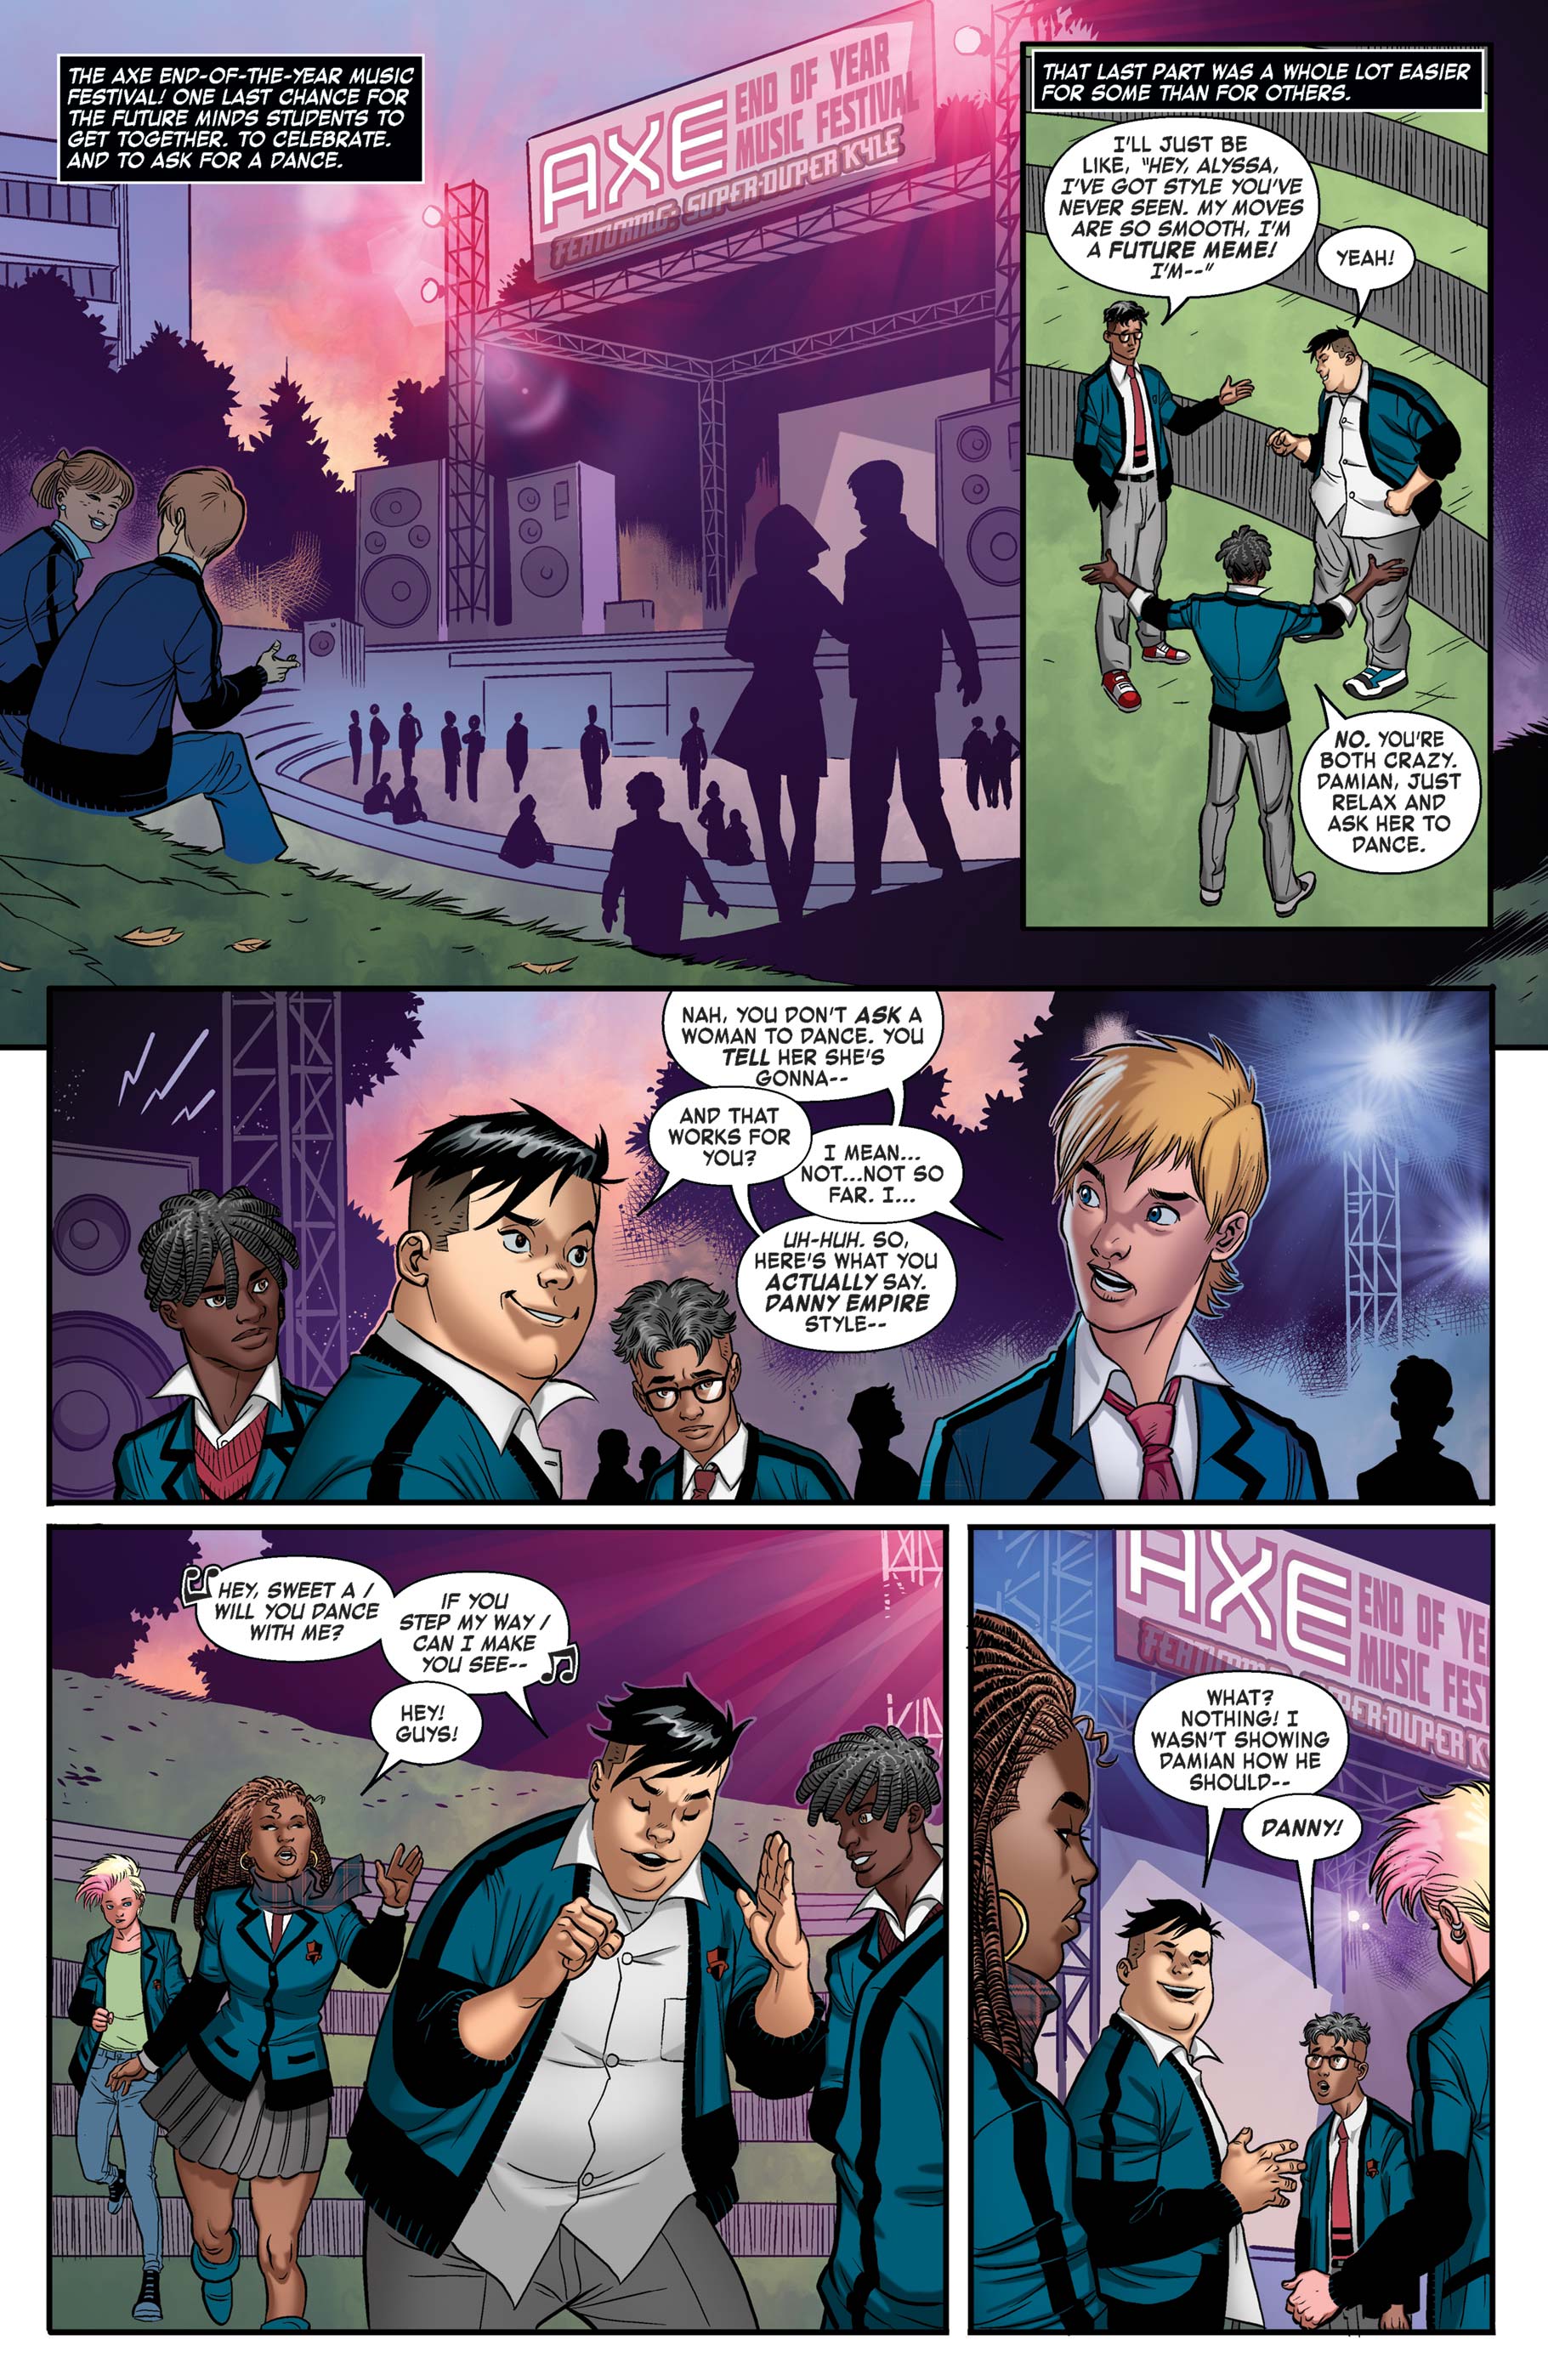 AXE: The Freshmen Issue Featuring The Avengers Full Page 4